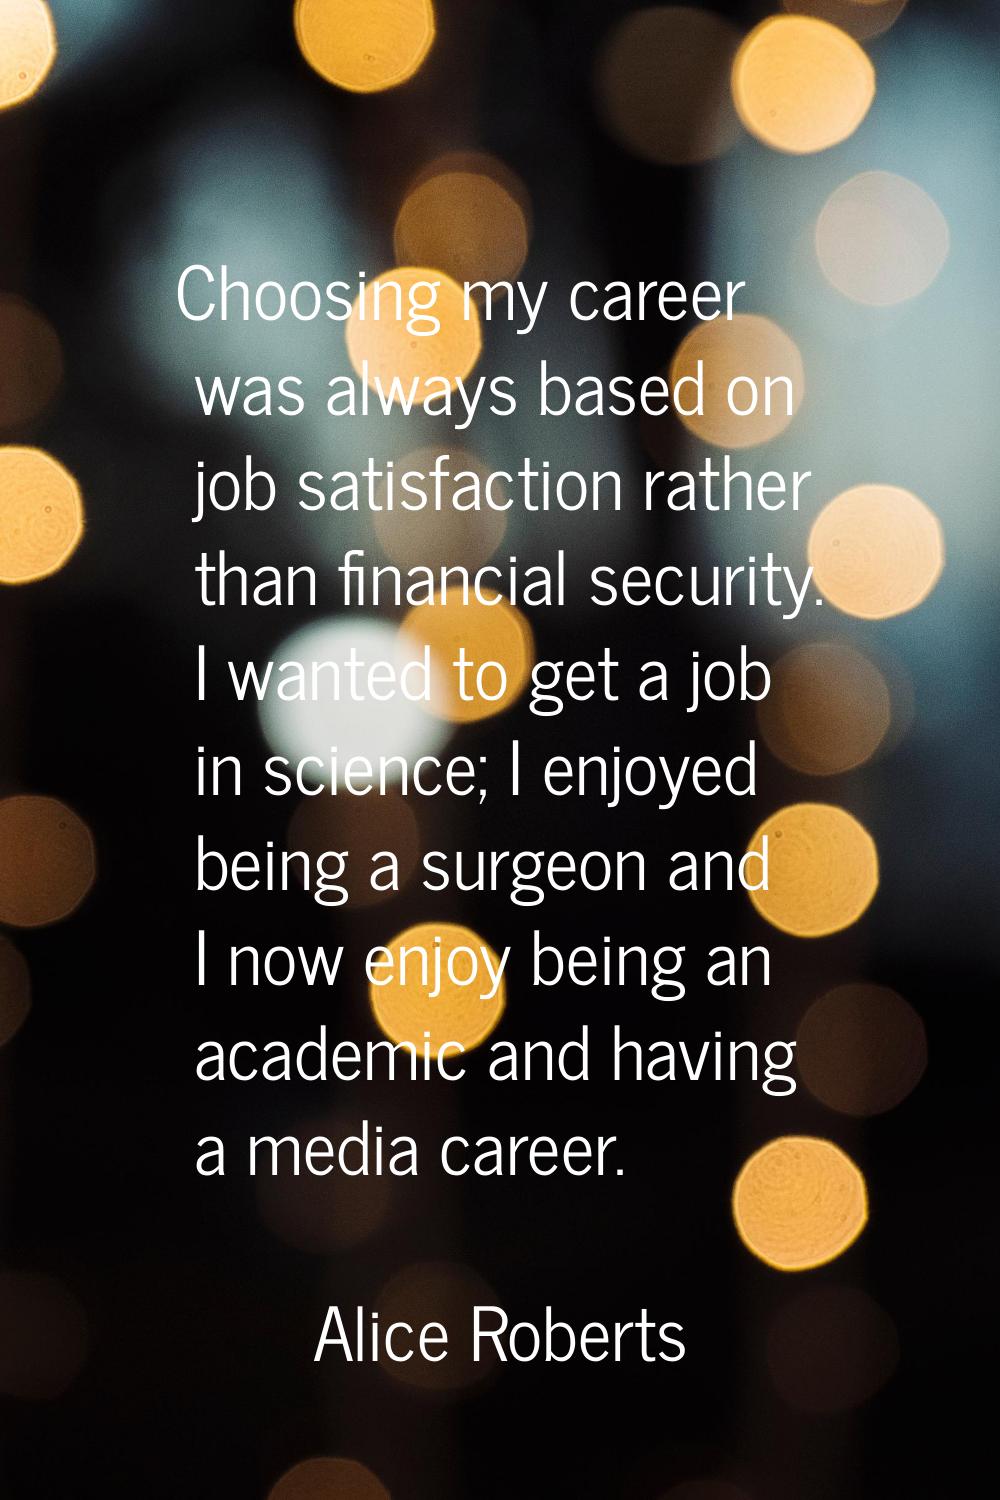 Choosing my career was always based on job satisfaction rather than financial security. I wanted to